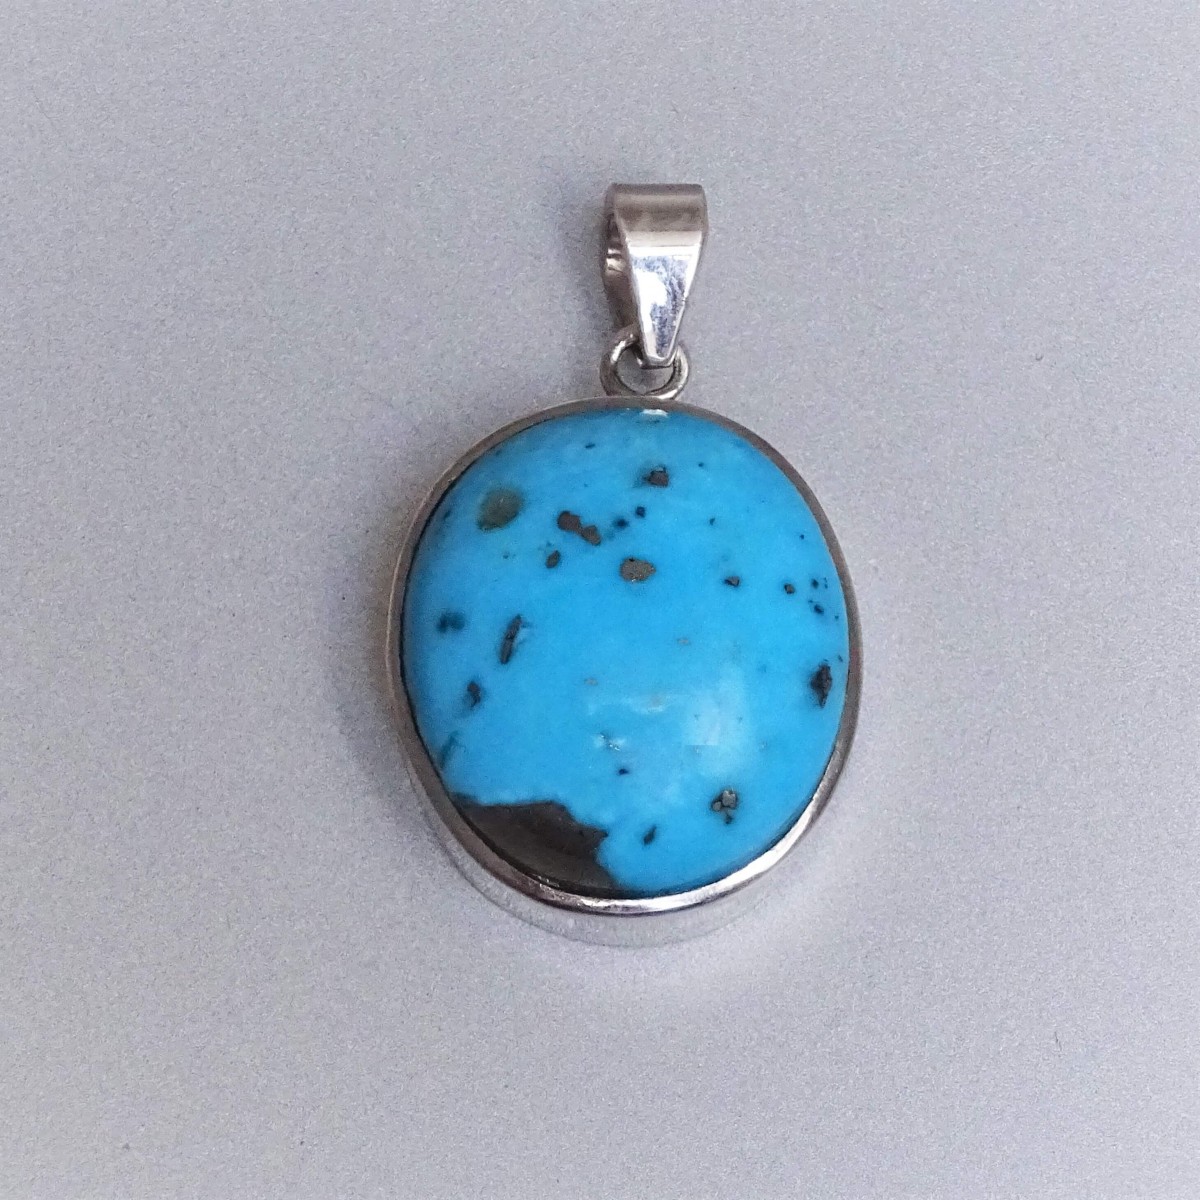 Turquoise genuine pendant 20.7g, certificate of authenticity, USA